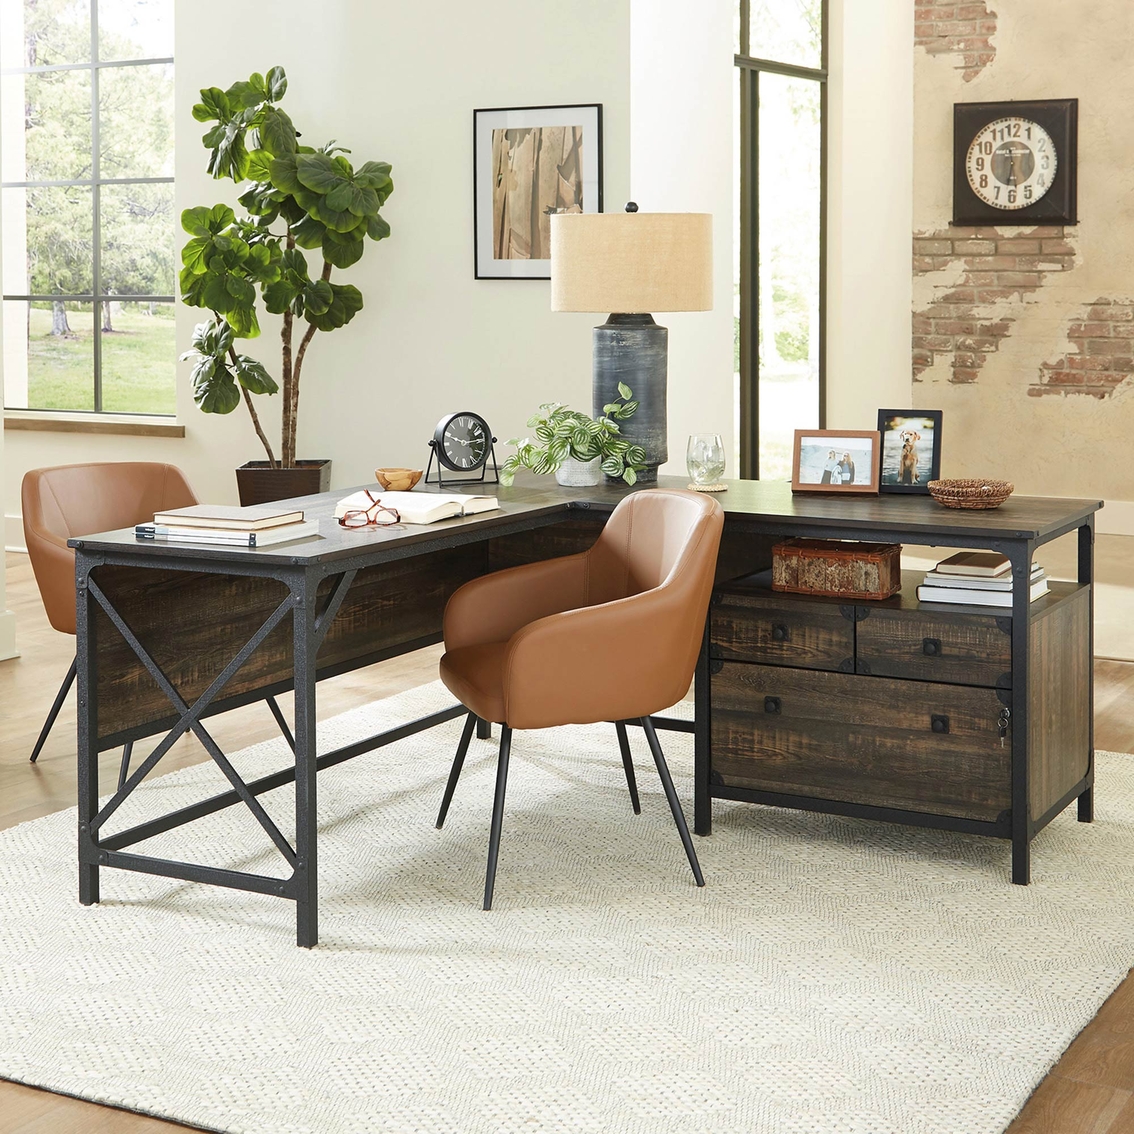 Sauder Wood and Metal L Desk with Drawers - Image 1 of 6